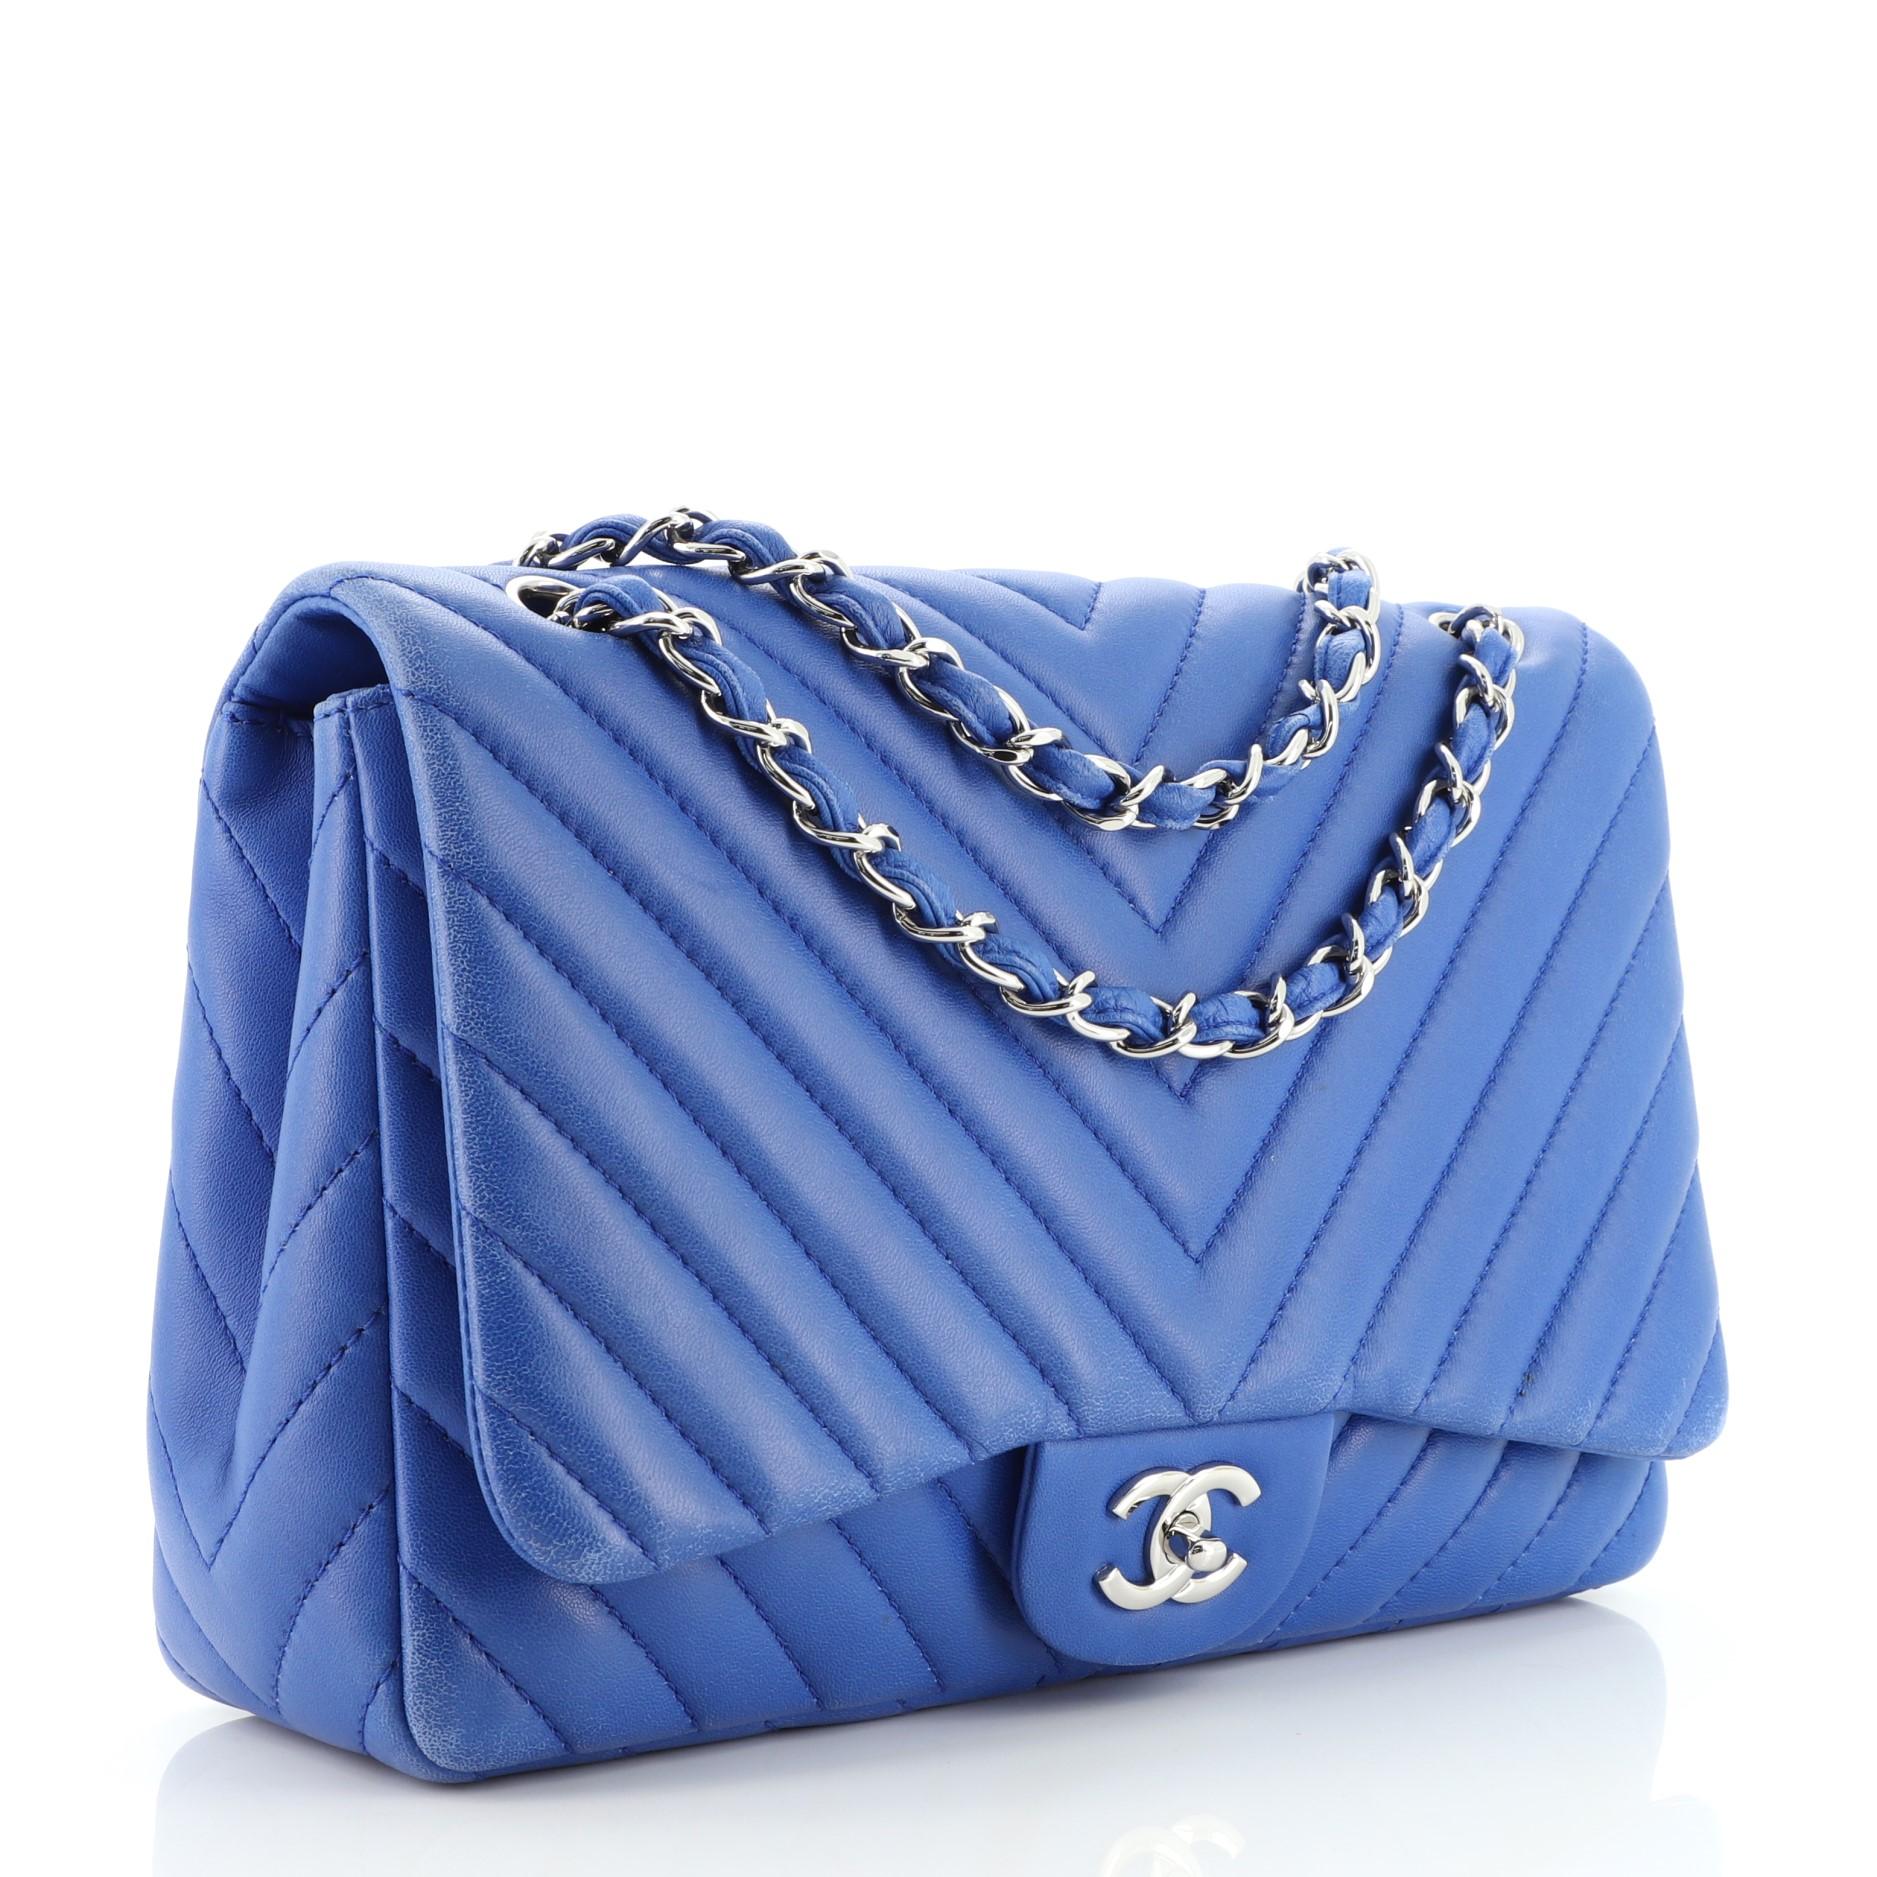 Chanel Classic Single Flap Bag Chevron Lambskin Jumbo. Odor in interior. Creasing, wear and scuffs on exterior, underneath flap and in interior, small indentations on base and rear pocket, heavy wear on exterior and flap edges. Moderate wear on